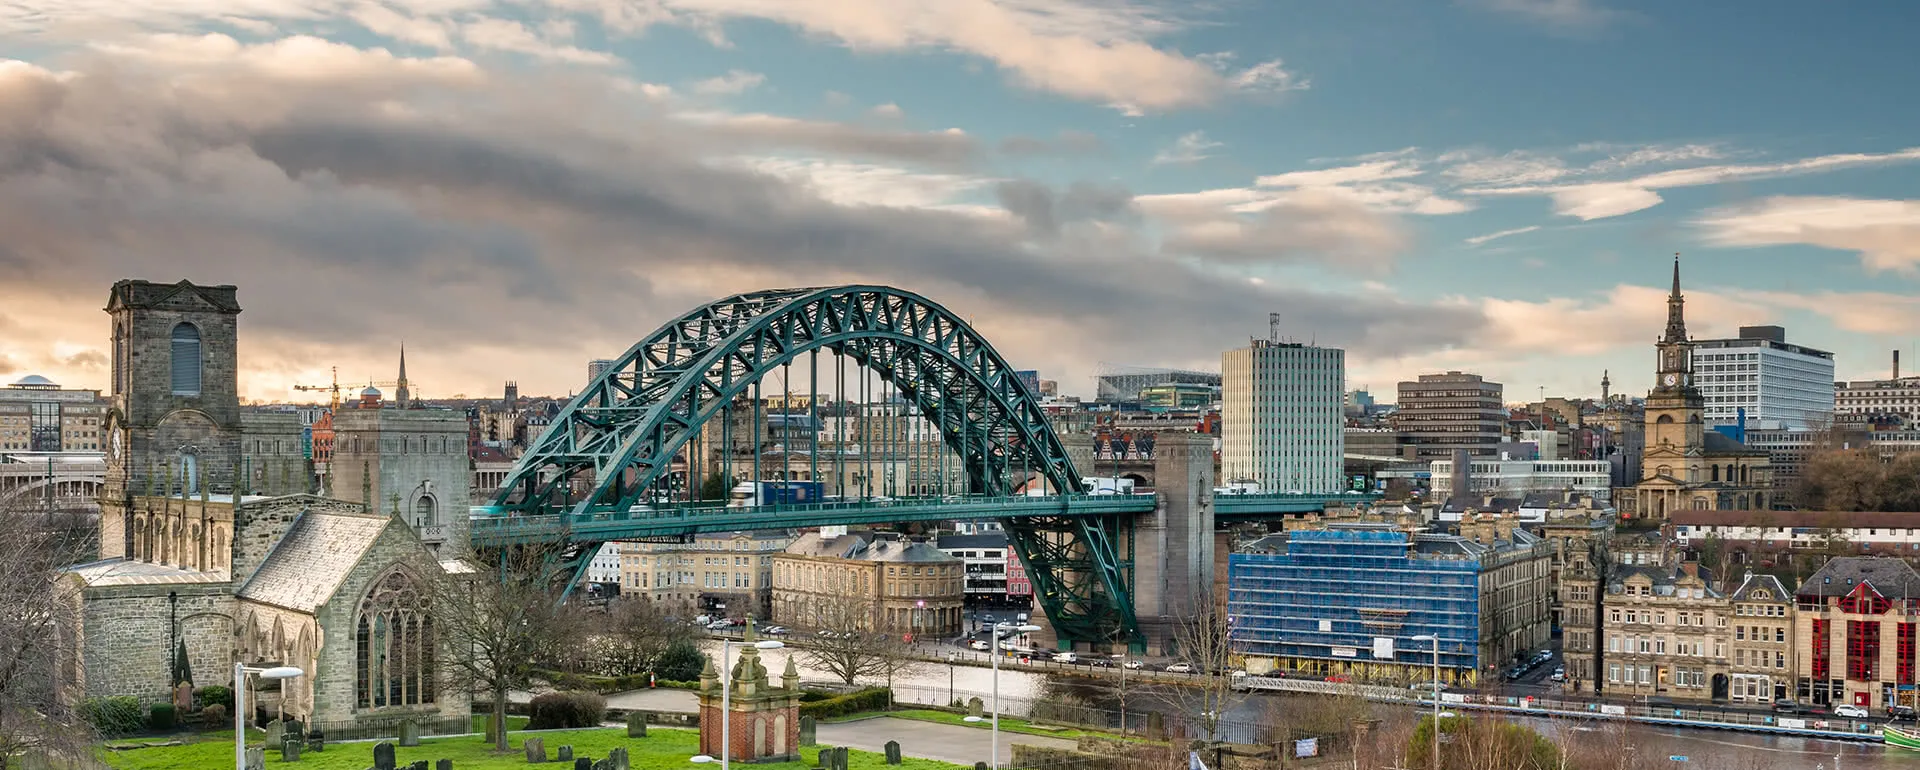 Newcastle upon Tyne - the destination with youth hostels